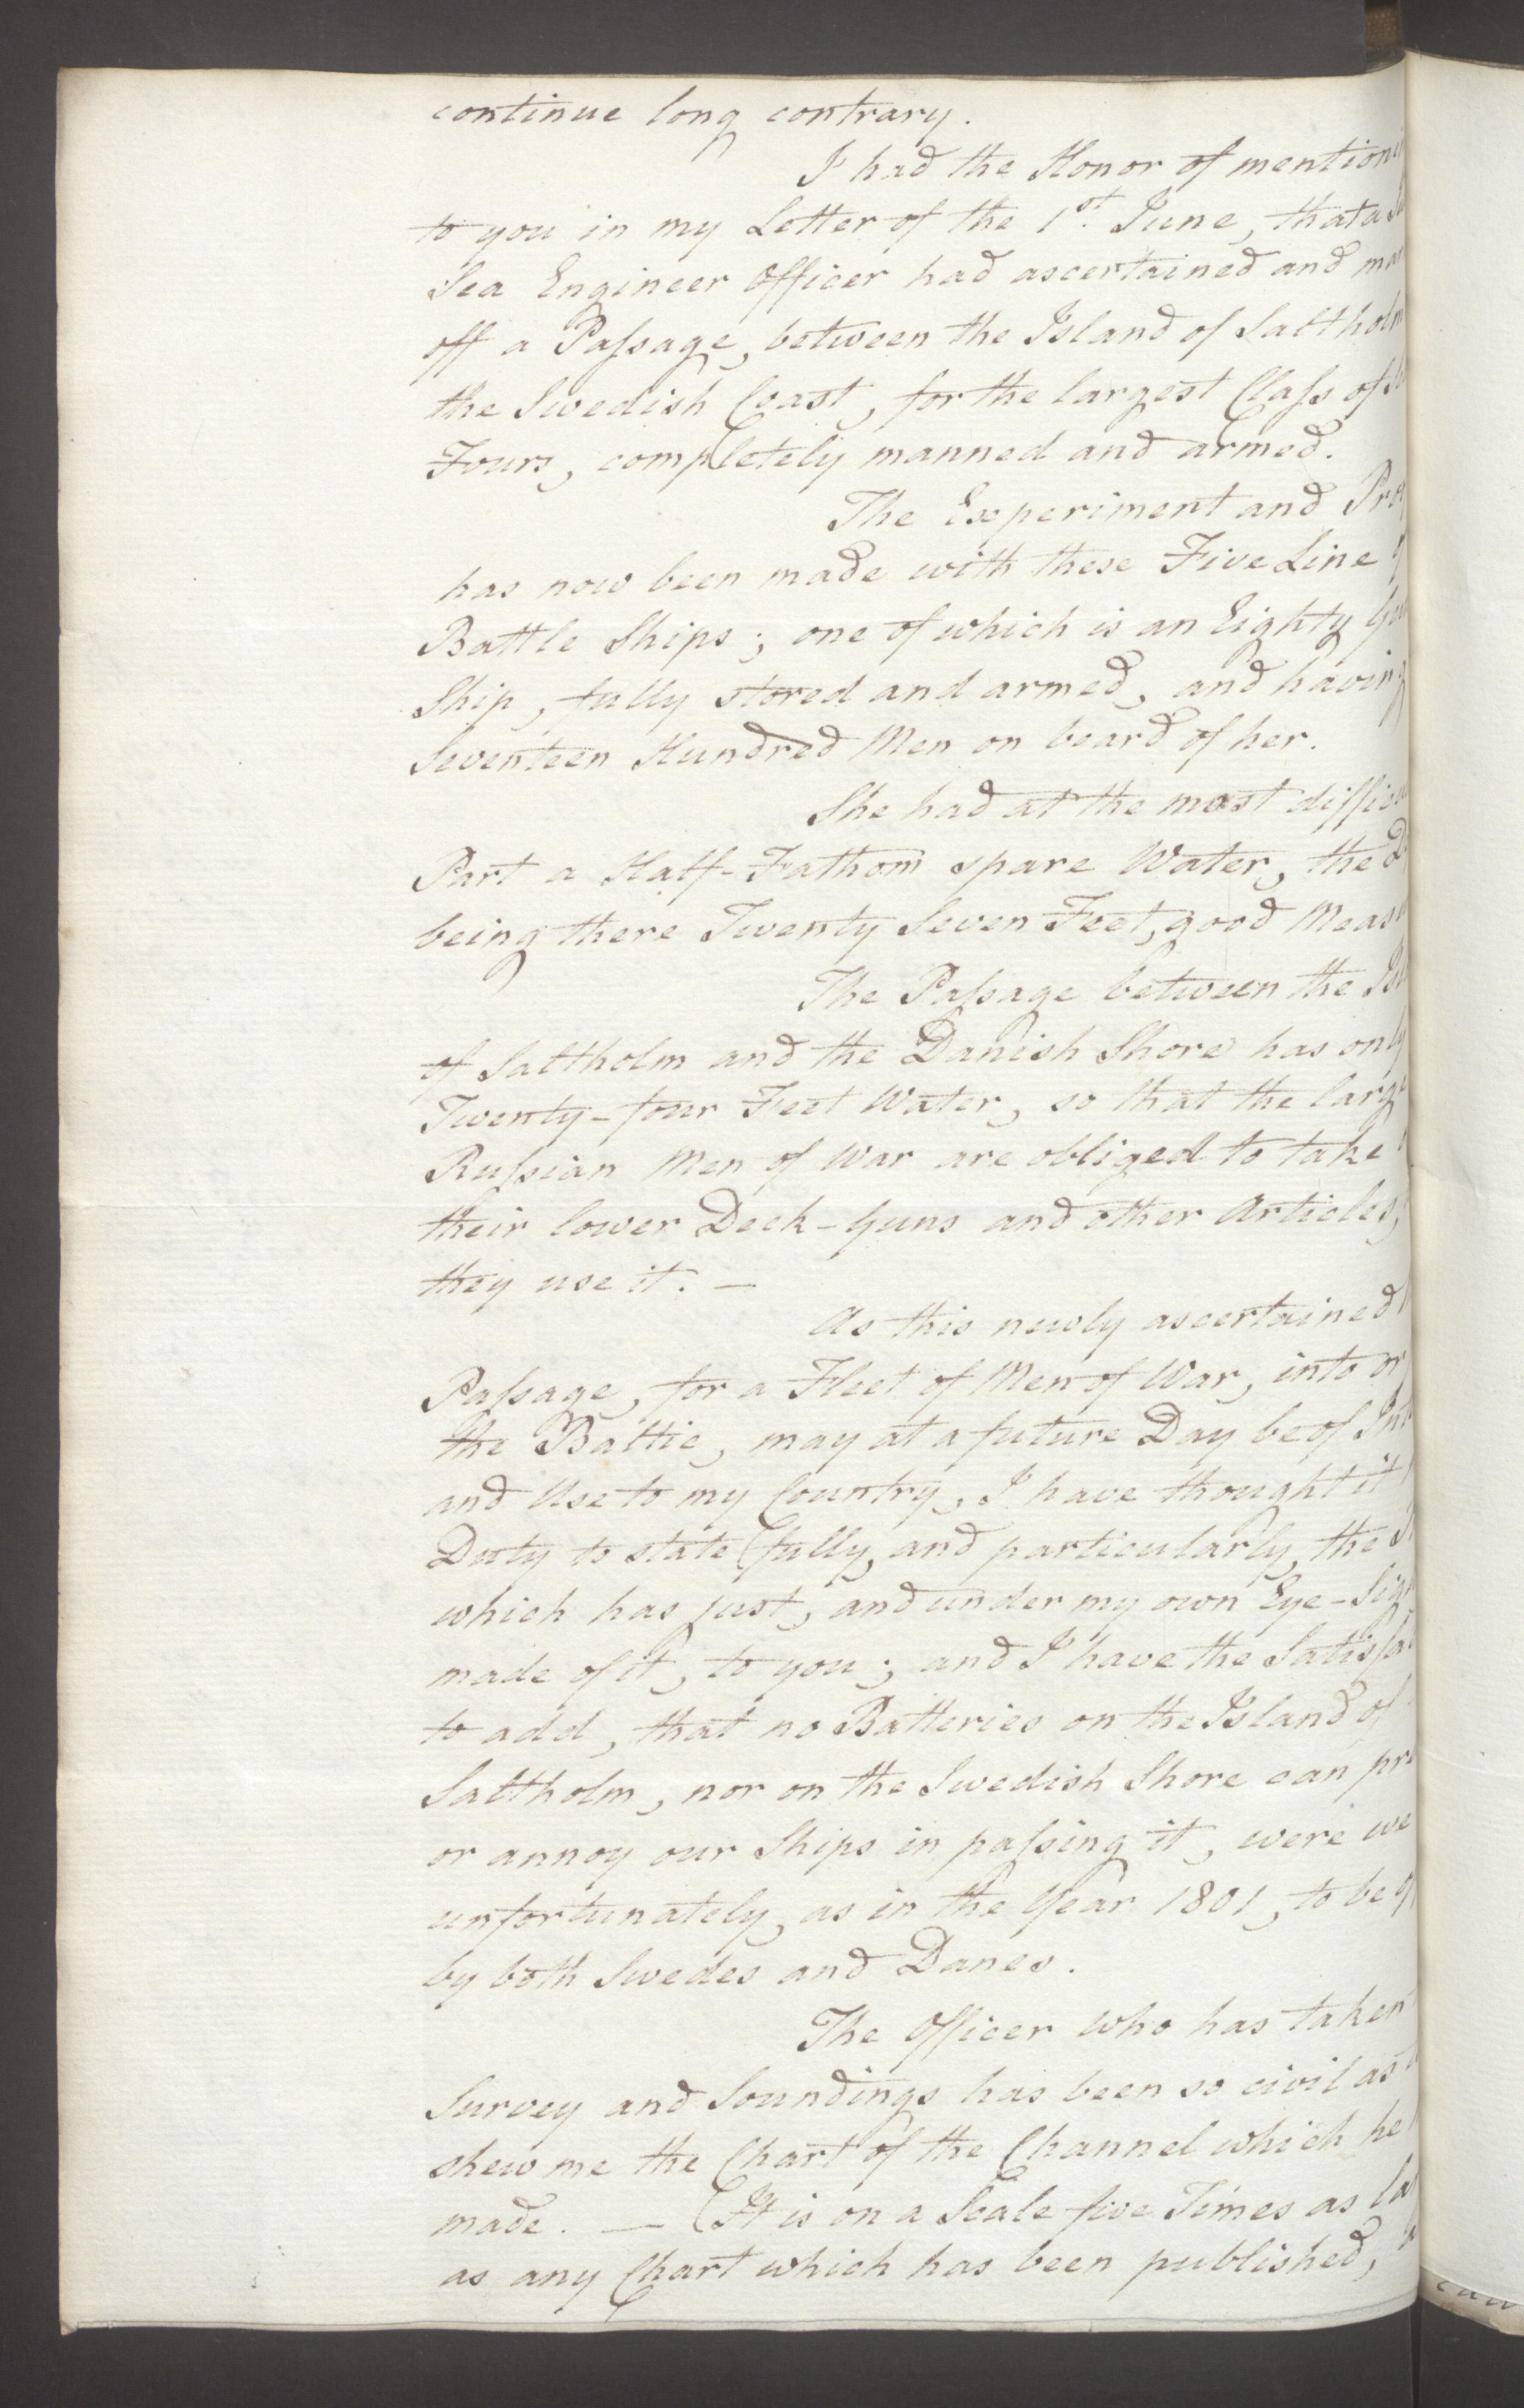 Foreign Office*, UKA/-/FO 38/16: Sir C. Gordon. Reports from Malmö, Jonkoping, and Helsingborg, 1814, p. 68